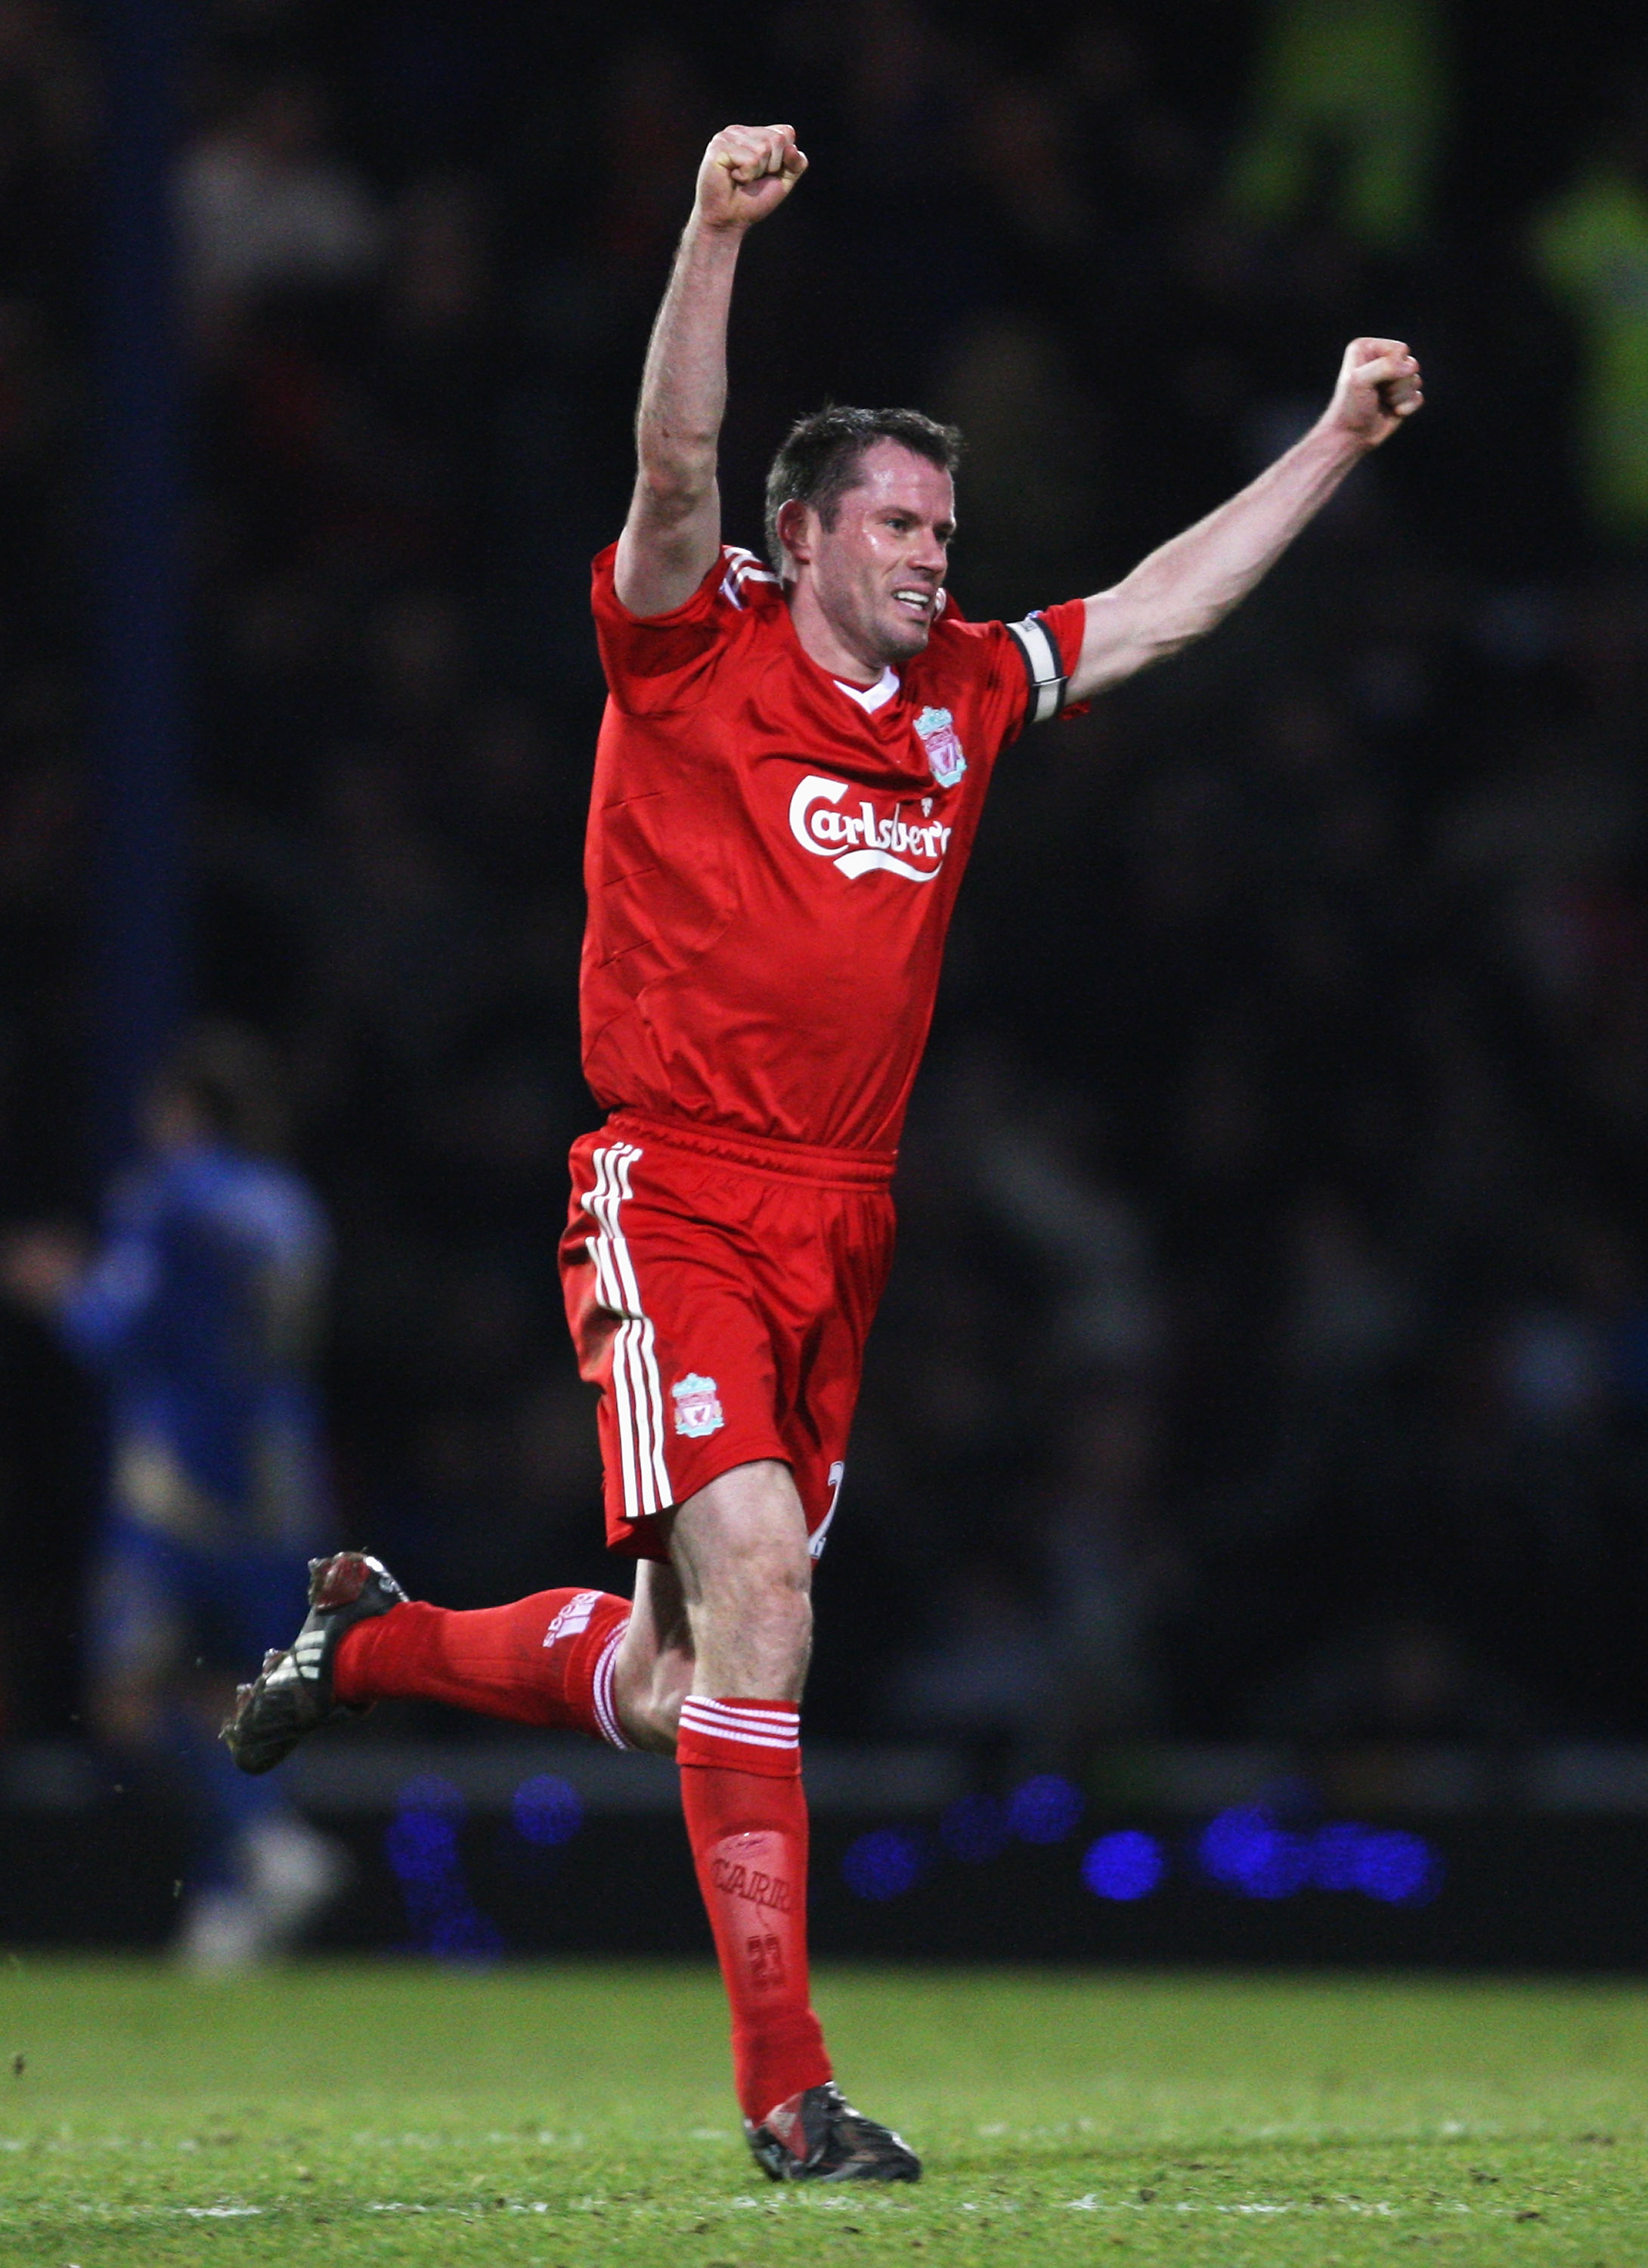 PORTSMOUTH, UNITED KINGDOM - FEBRUARY 07: Jamie Carragher of Liverpool celebrates Fernando Torres' winning goal during the Barclays Premier League match between Portsmouth and Liverpool at Fratton Park on February 7, 2009 in Portsmouth, England.  (Photo b